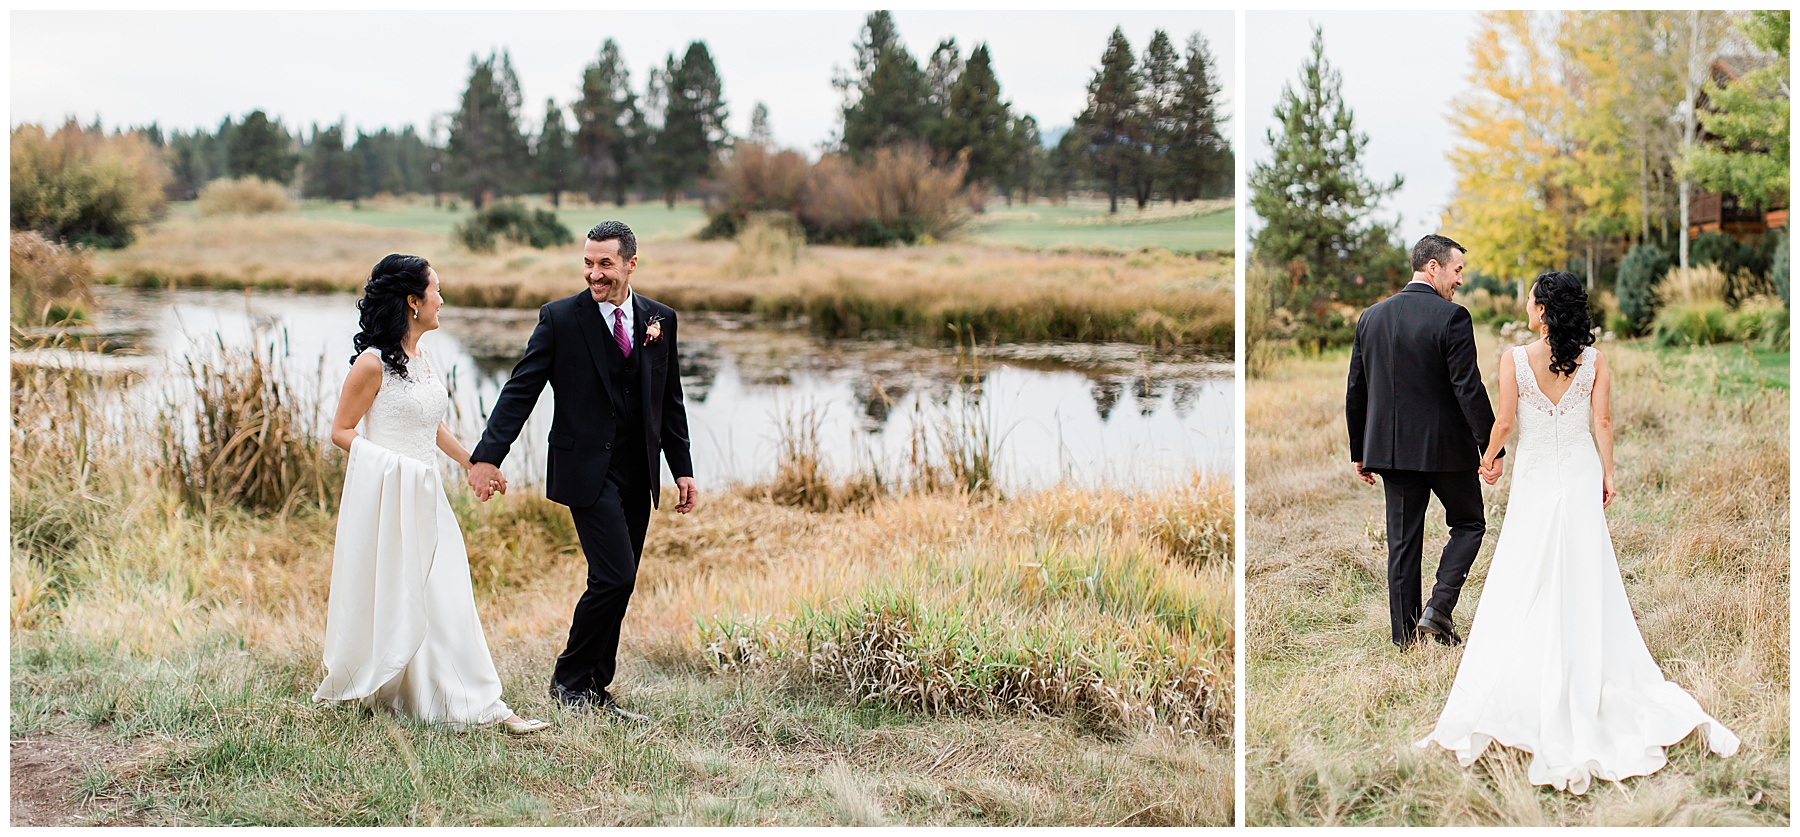 Portrait of the newlyweds walking through the Sunriver Resort by the Riverfront